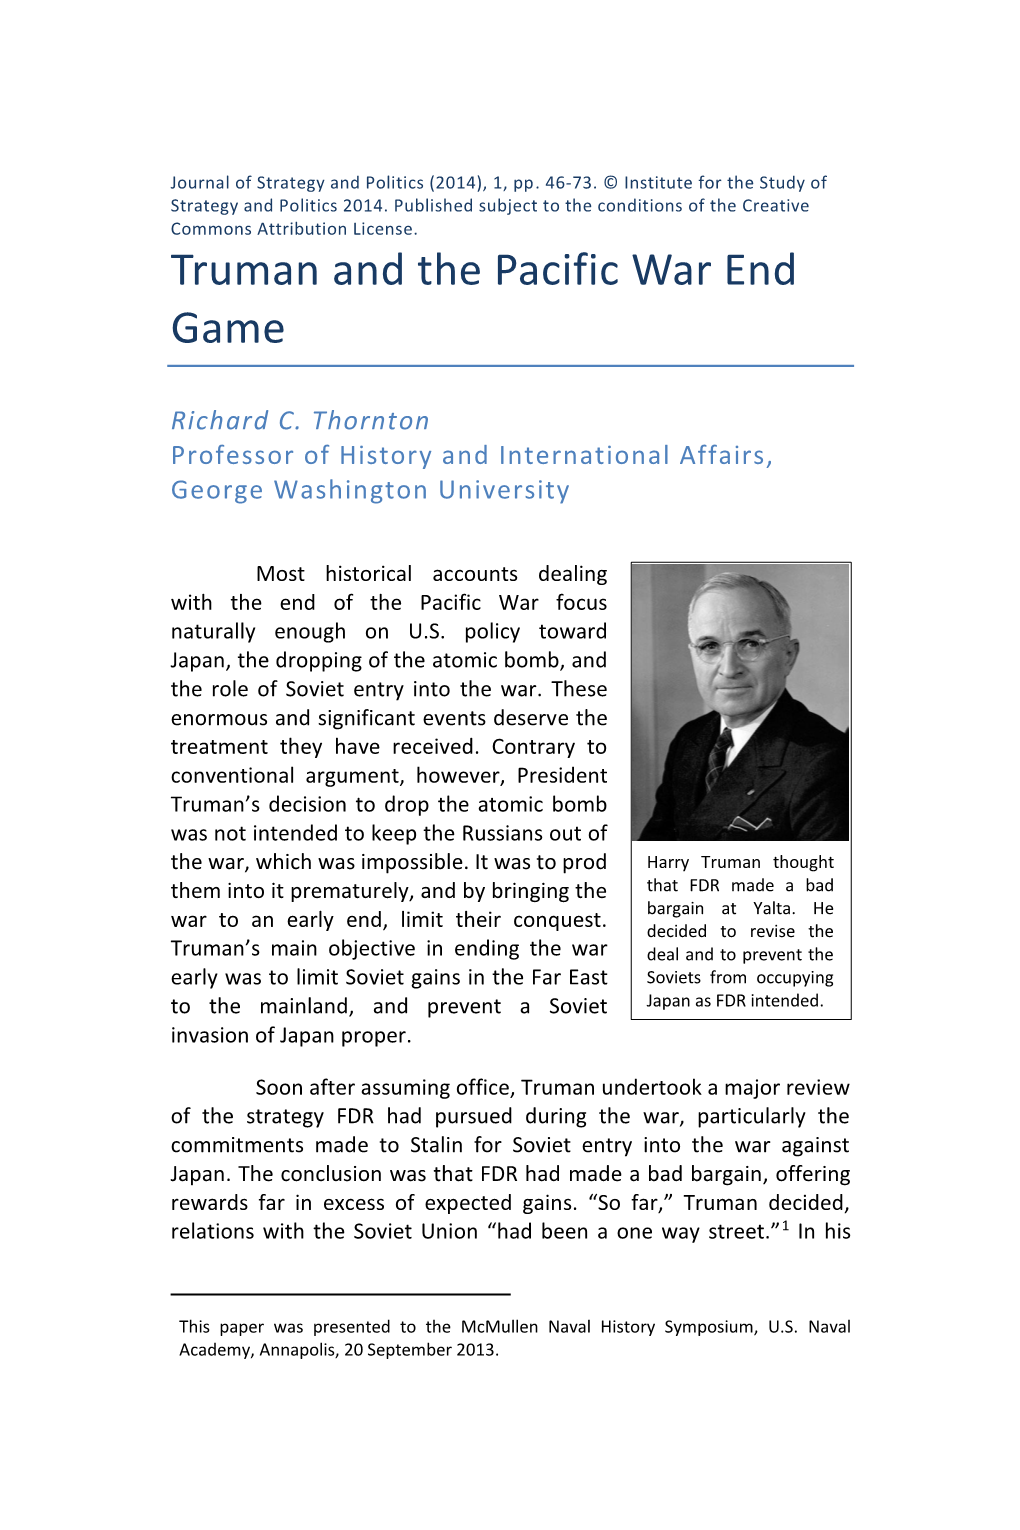 Truman and the Pacific War End Game